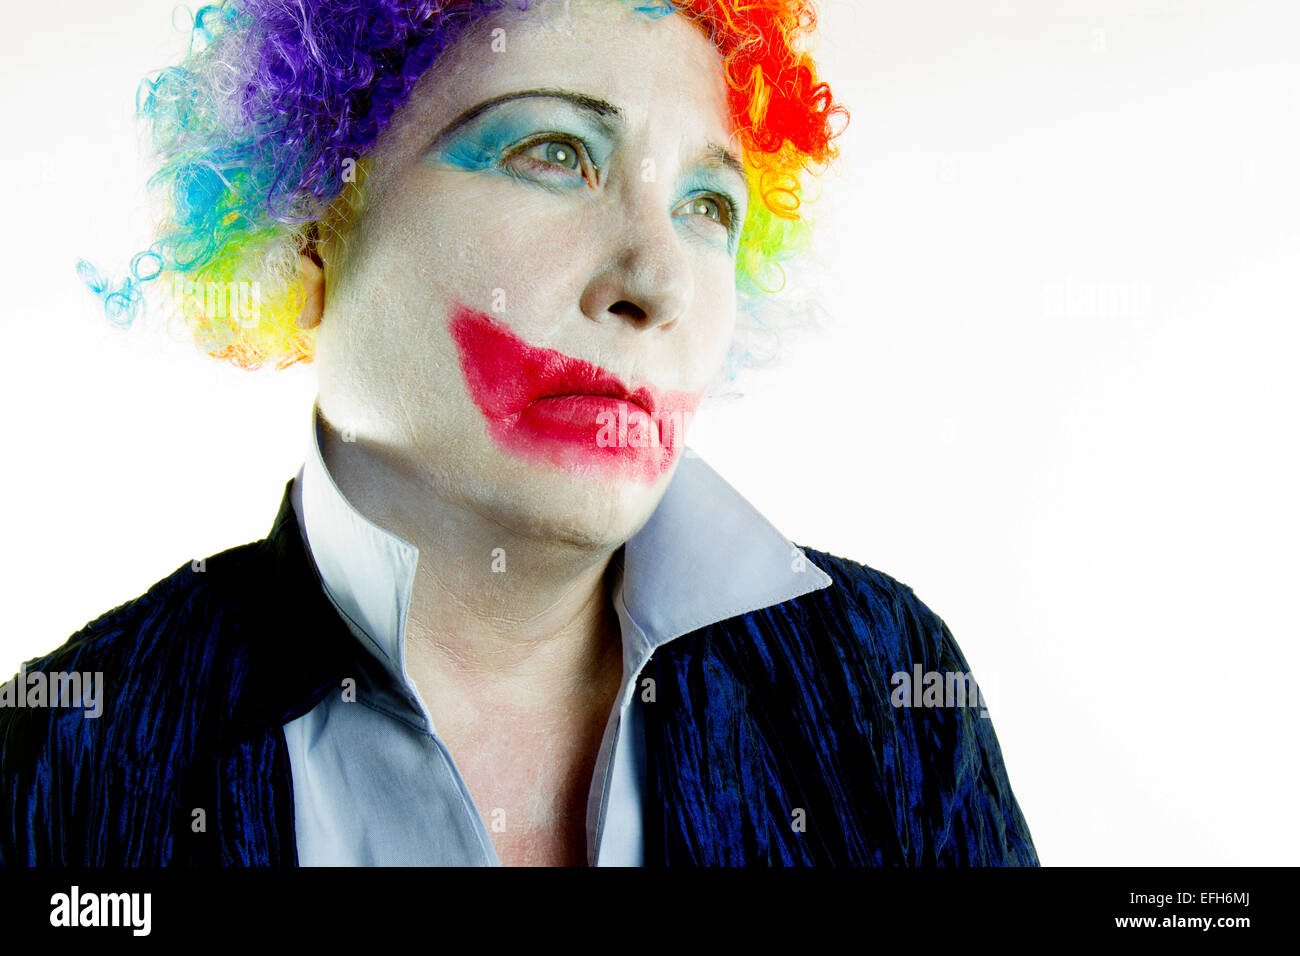 Woman dressed in clown wig and make-up with a sad expression in high tone Stock Photo